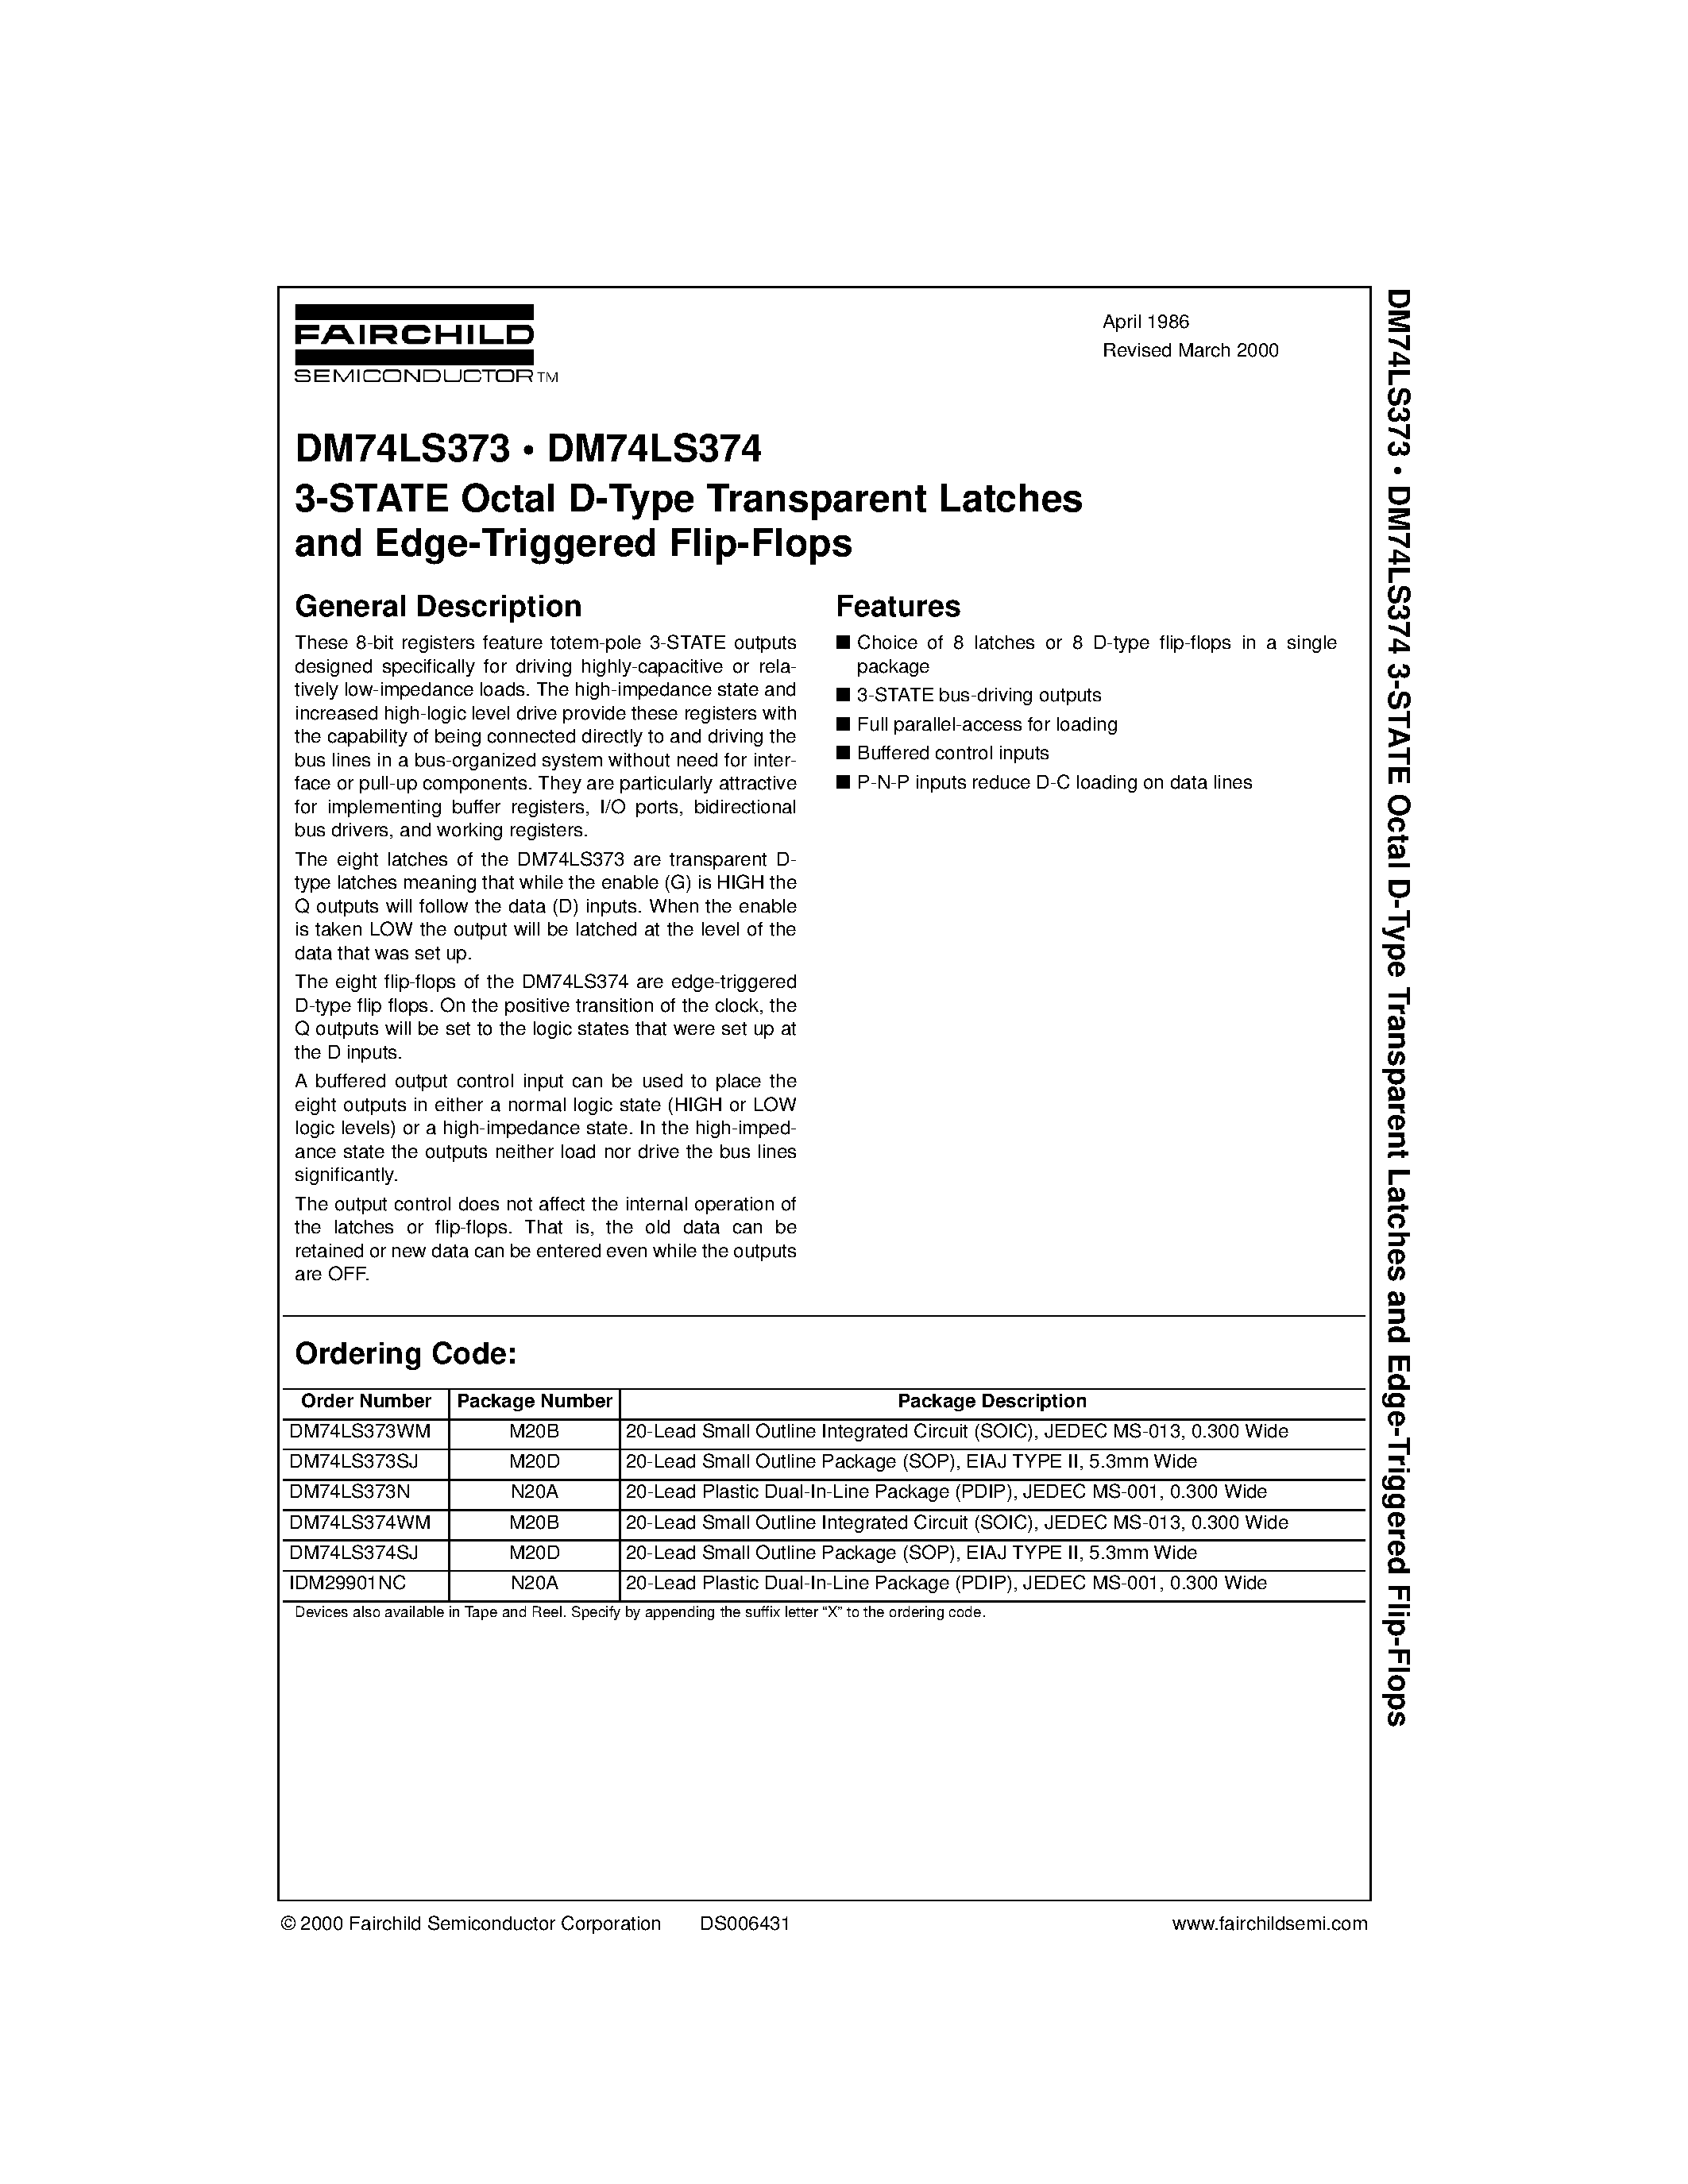 Datasheet 74373 - 3-STATE Octal D-Type Transparent Latches and Edge-Triggered Flip-Flops page 1